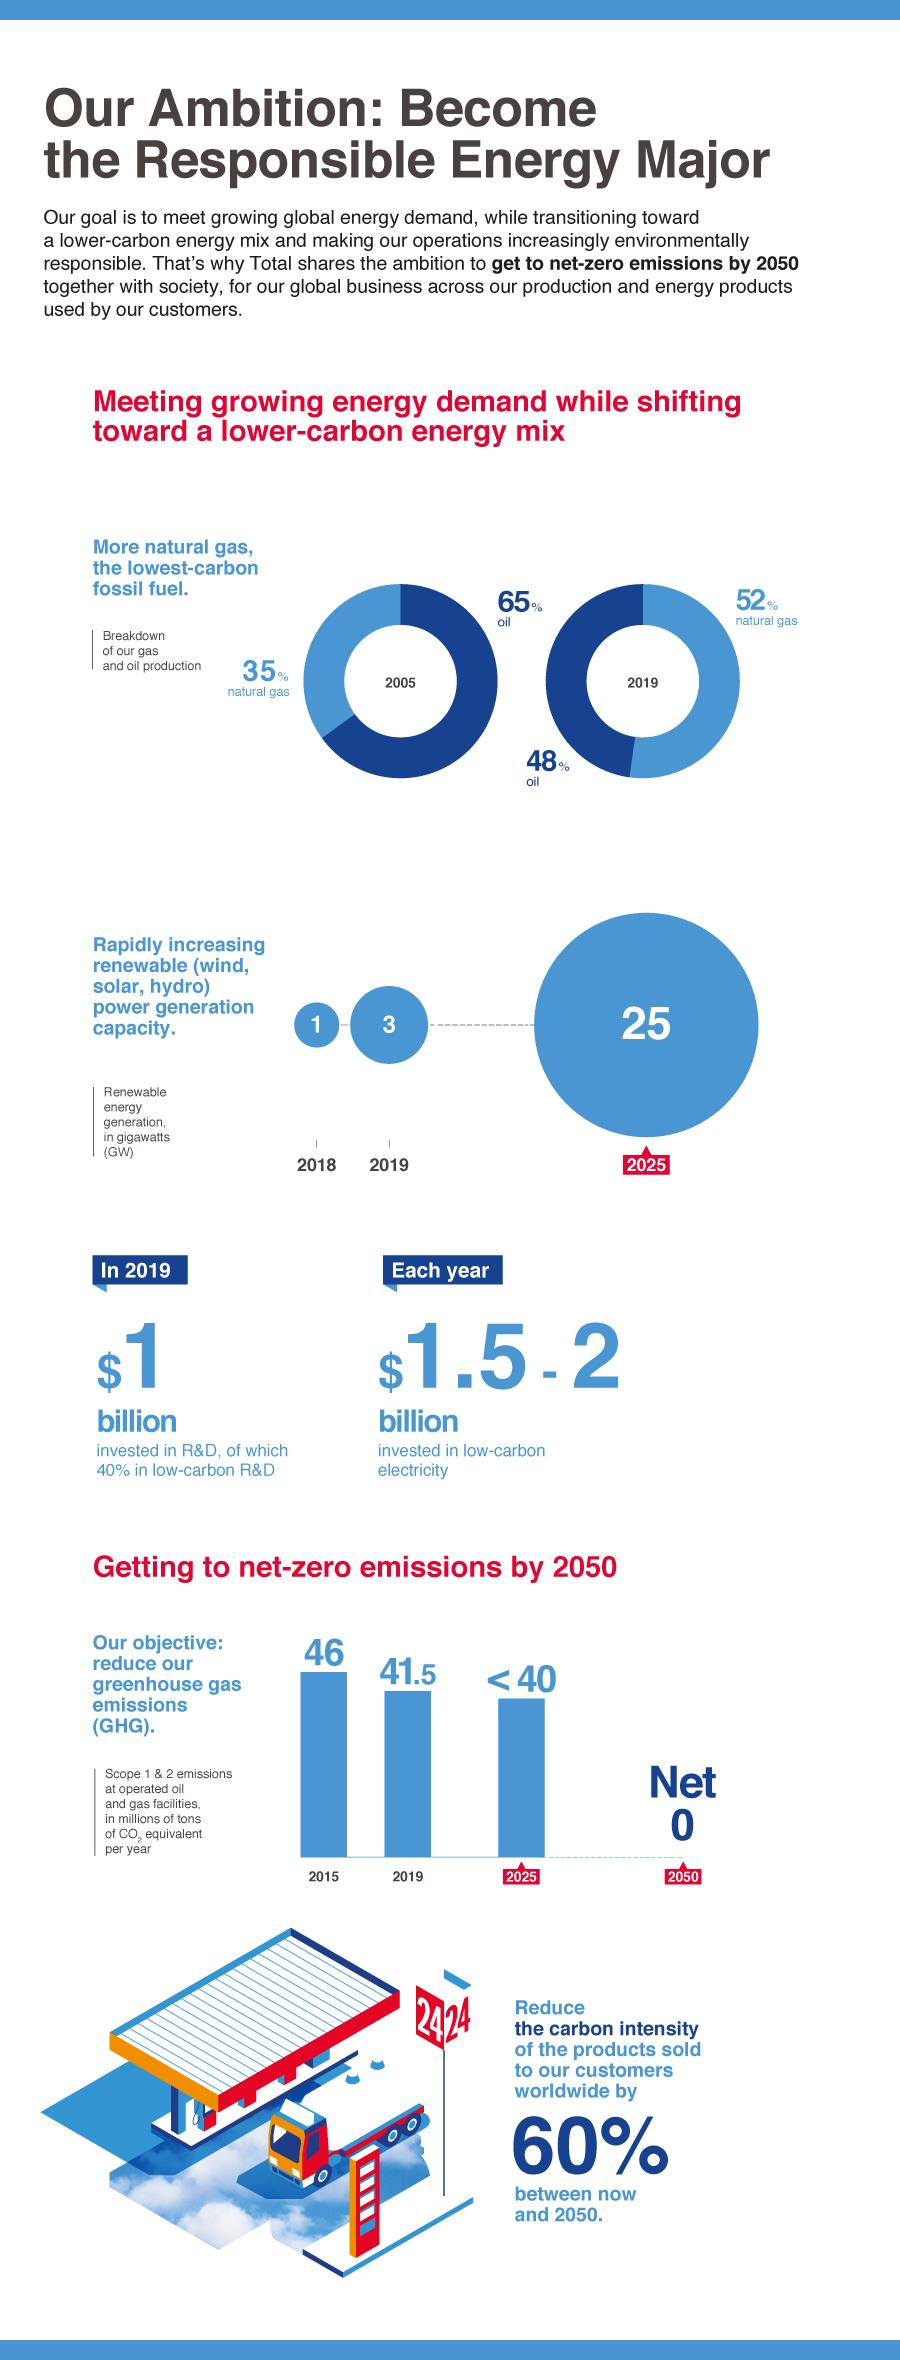 Infographic of TotalEnergies’s climate ambition in a few key figures